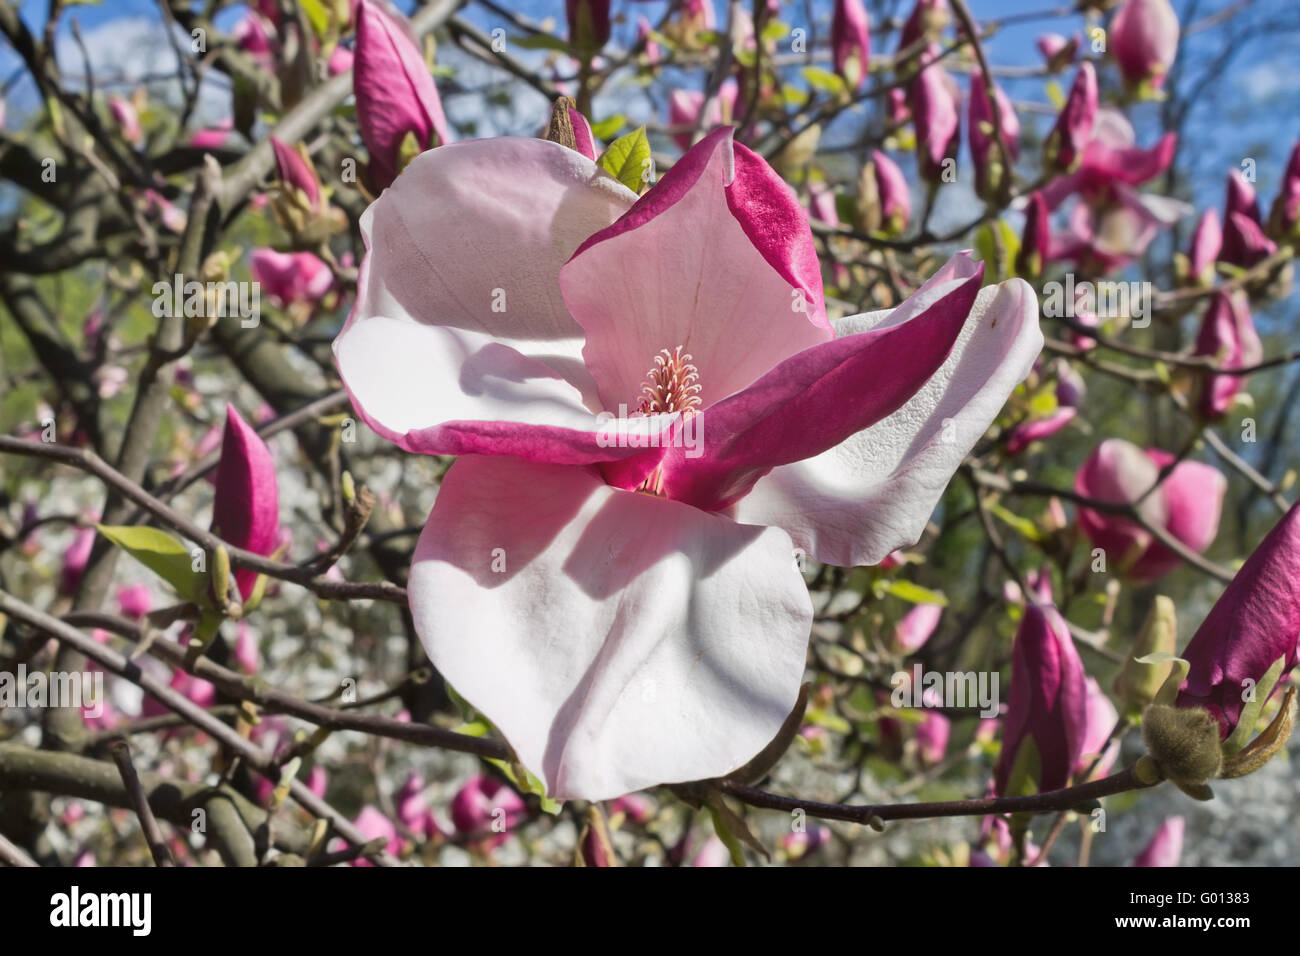 Spring open flower pink magnolia close up Stock Photo